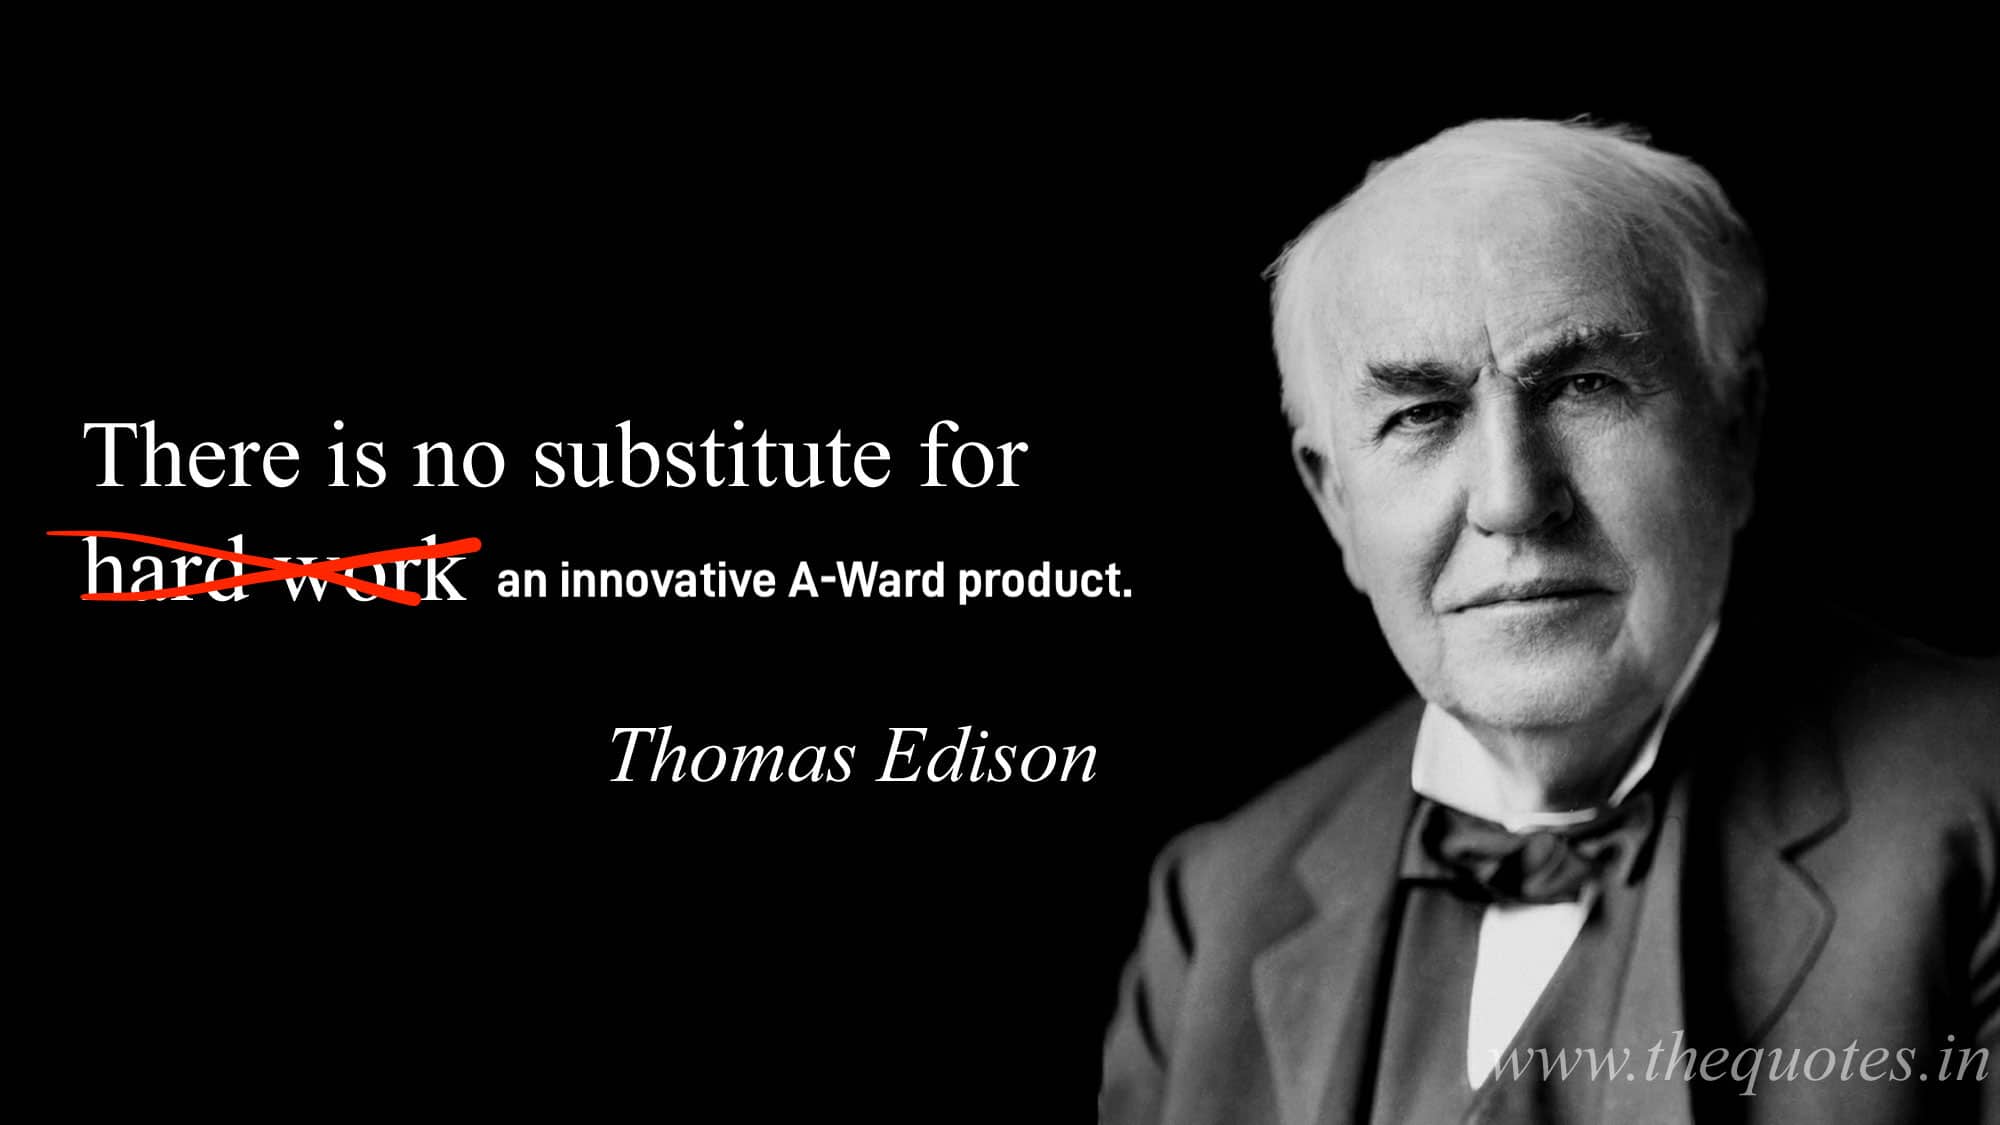 7354567_full-good-senior-quotes-about-hard-work-there-is-no-substitute-for-hard-work-thomas-edison-quotes